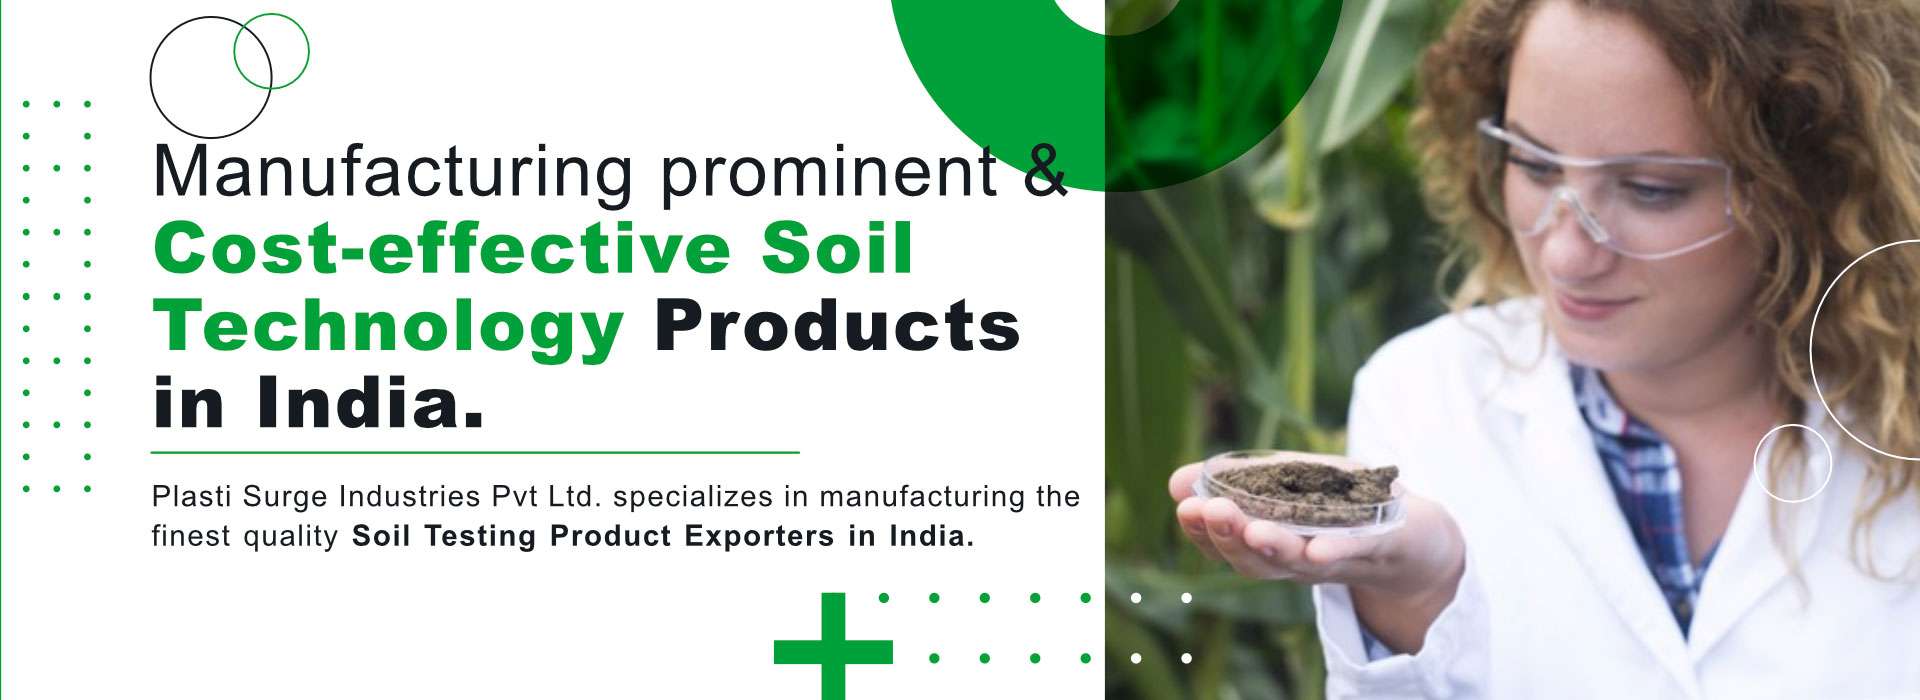  Manufacturing prominent & cost effective Soil Technology Products in India Manufacturers in Nigeria